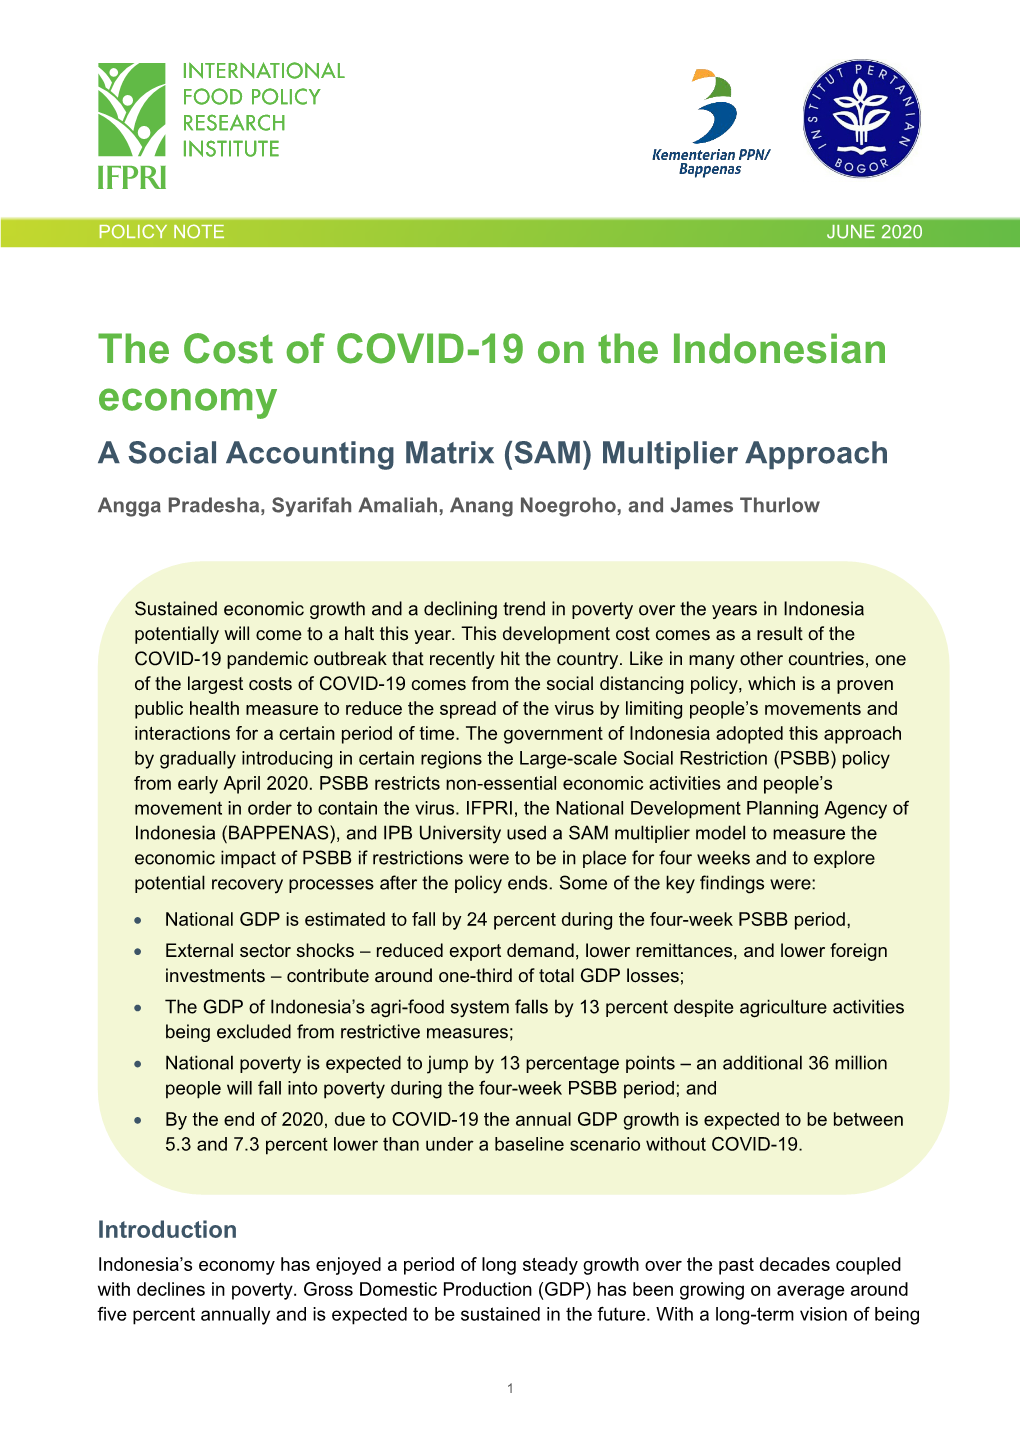 The Cost of COVID 19 on the Indonesian Economy